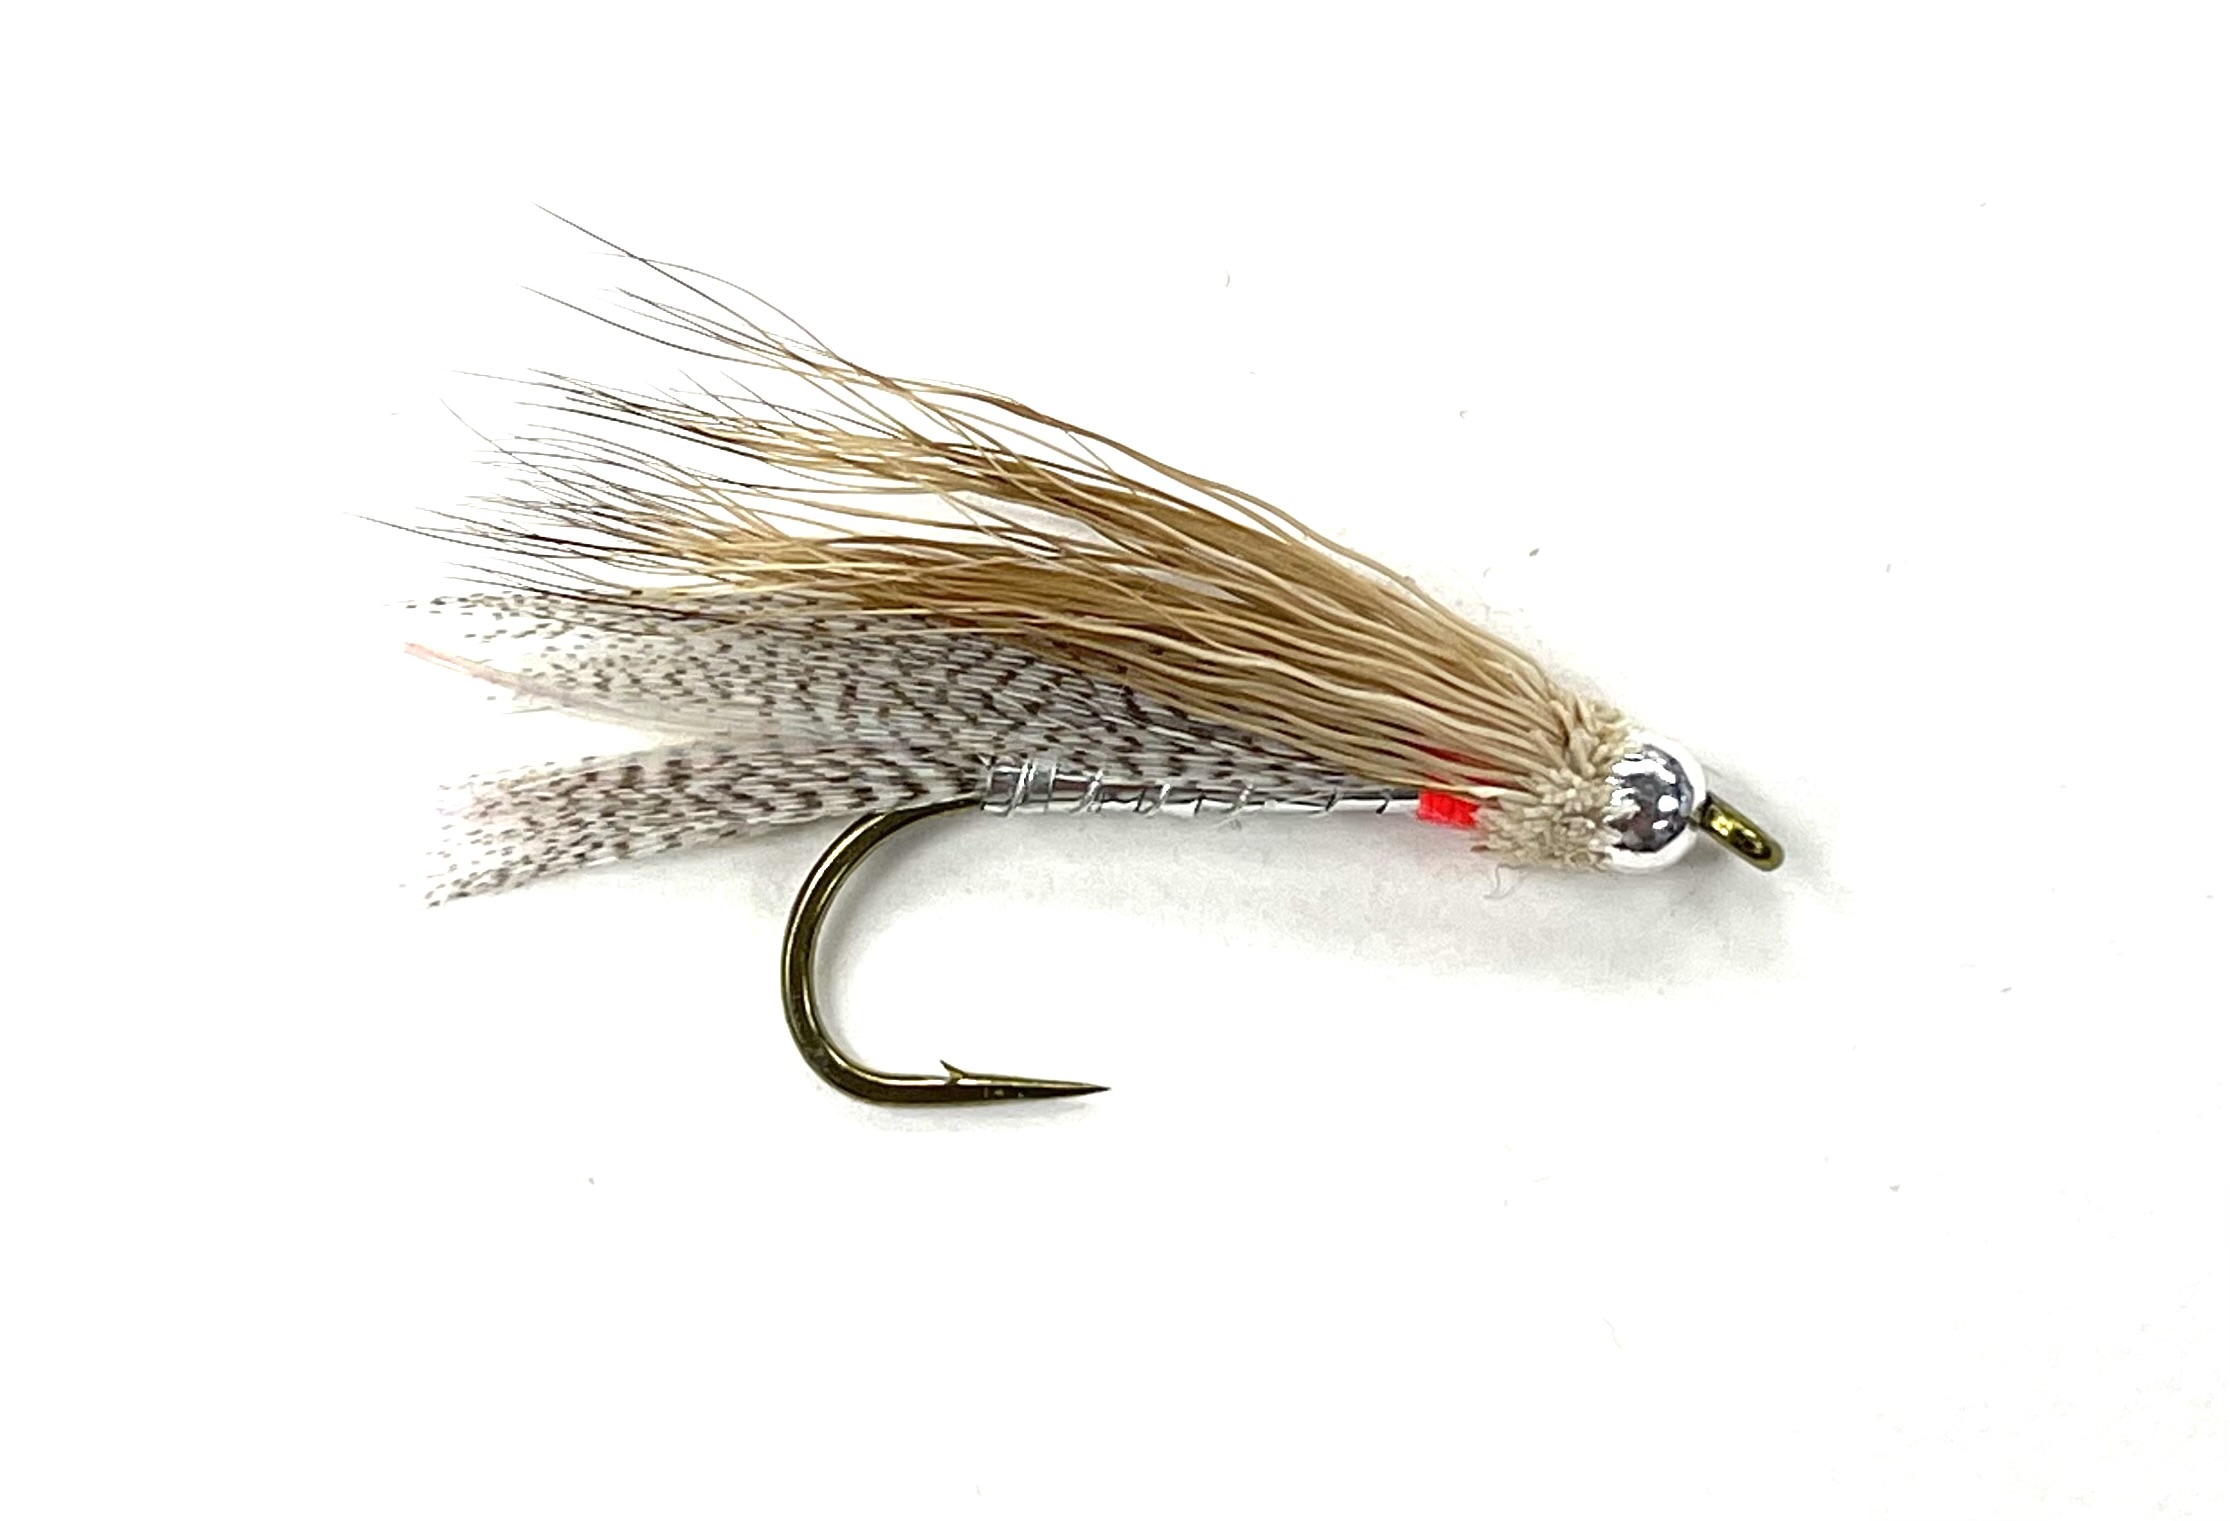 FAD Bead Head Silver Rolled Muddler - Natural - Size 6